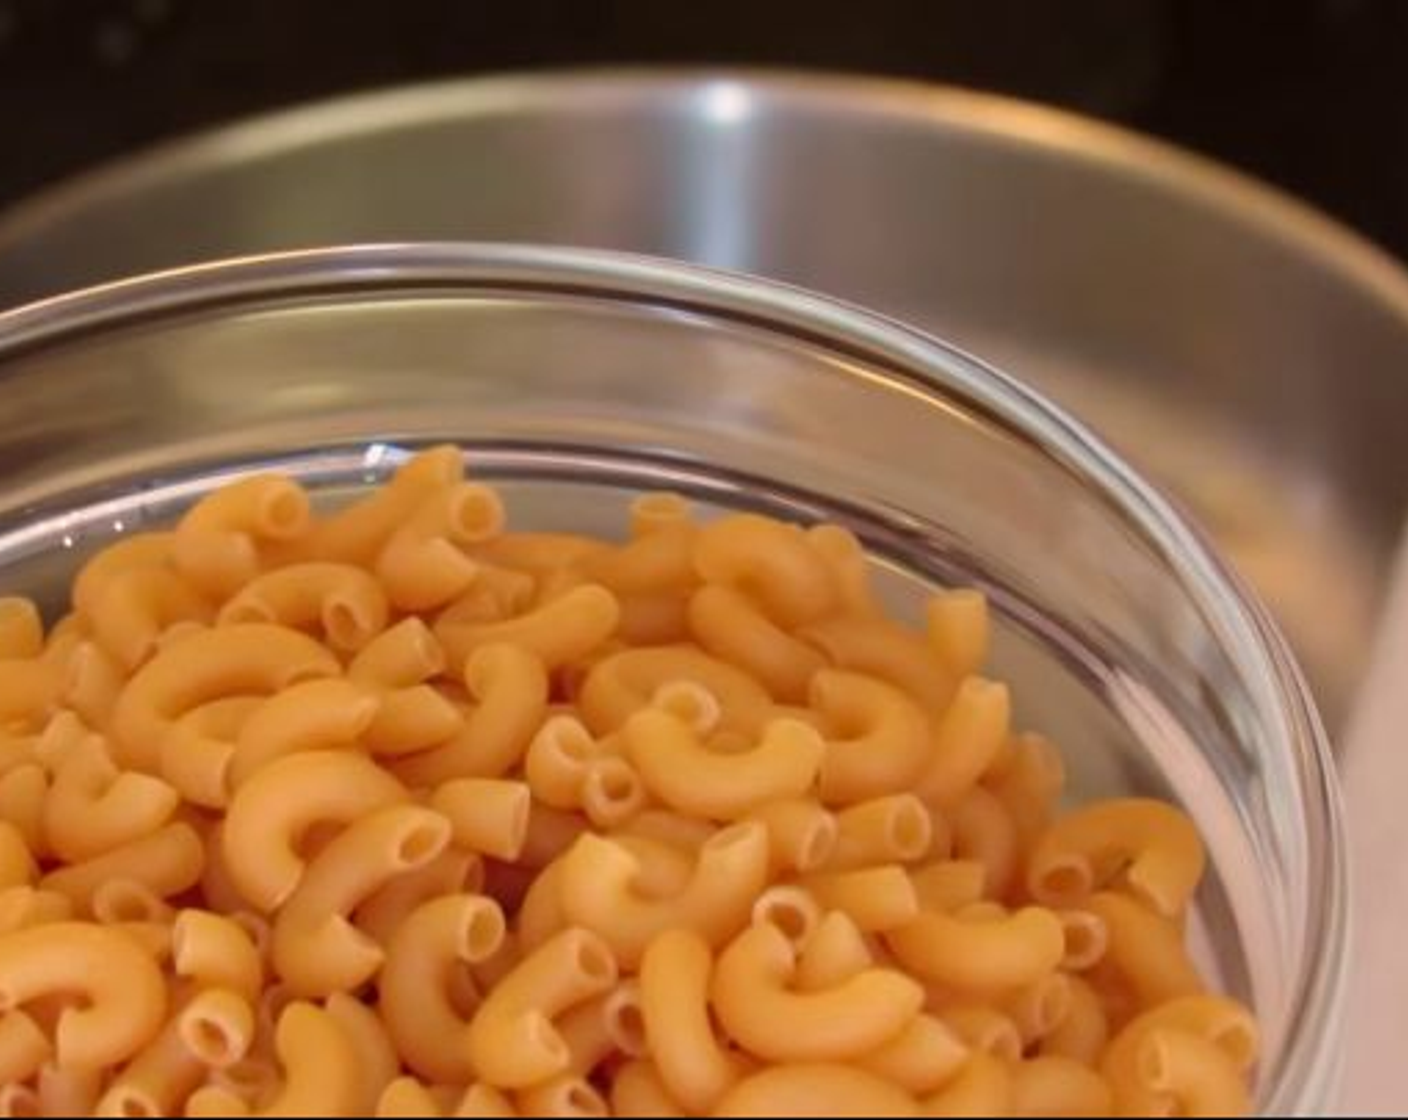 step 1 Bring a pot of water to boil, add some salt and Elbow Macaroni (12 oz). Cook for about 6 minutes.